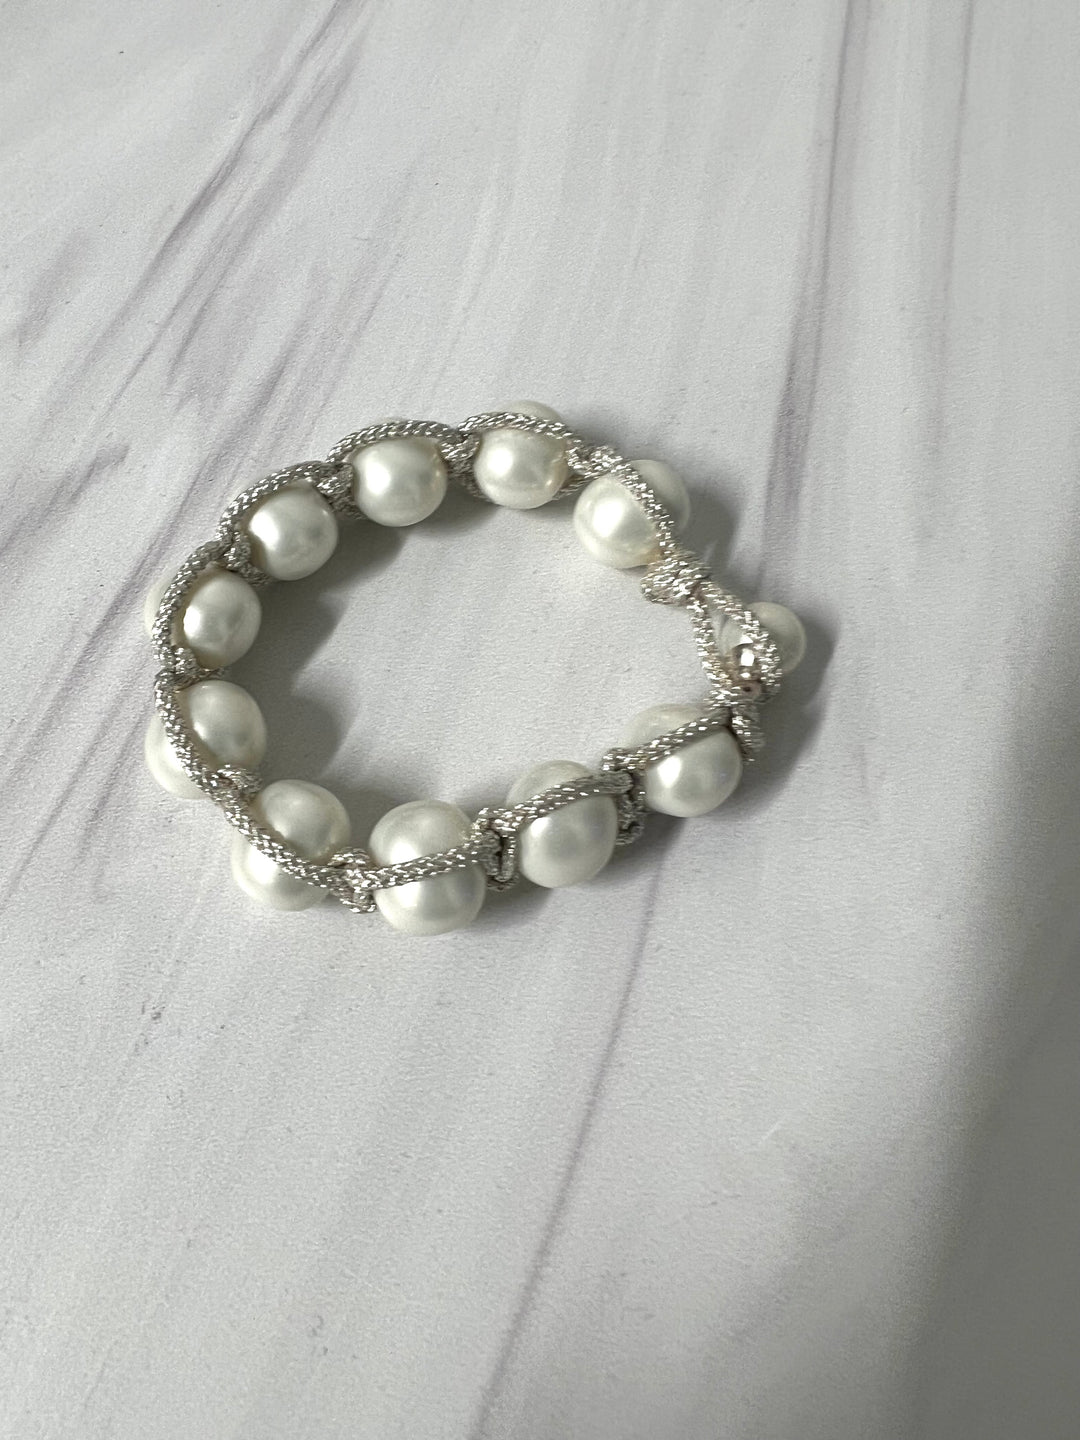 Pearl Macrame Bracelet with button clasp